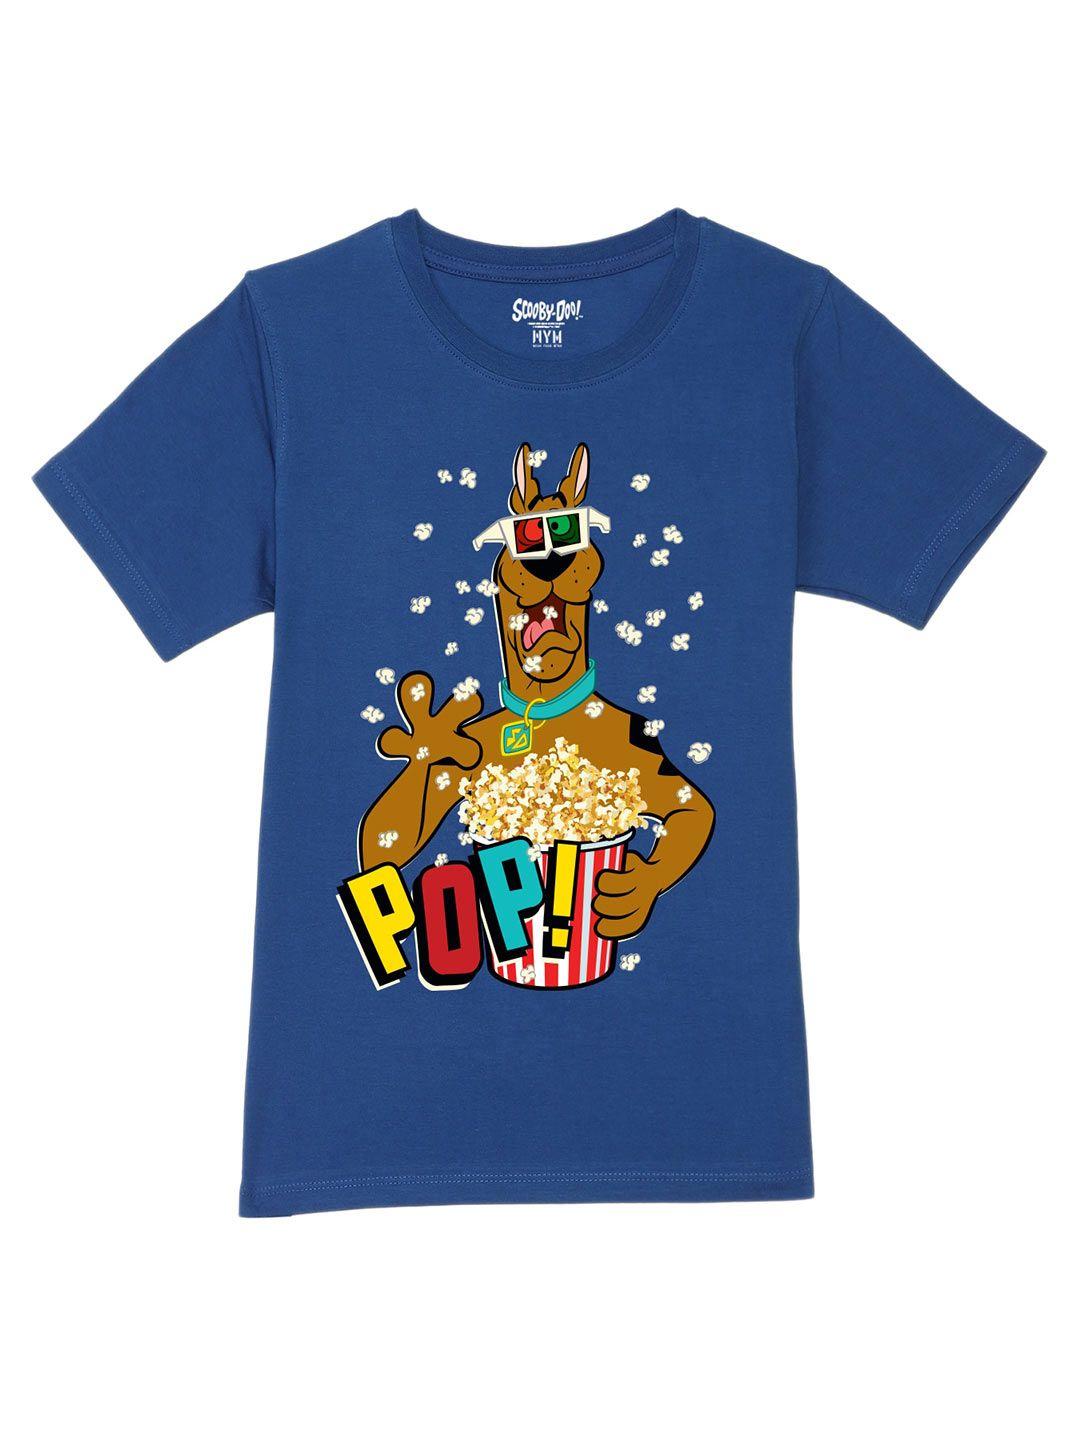 wear-your-mind-boys-graphic-scooby-doo-printed-pure-cotton-t-shirt